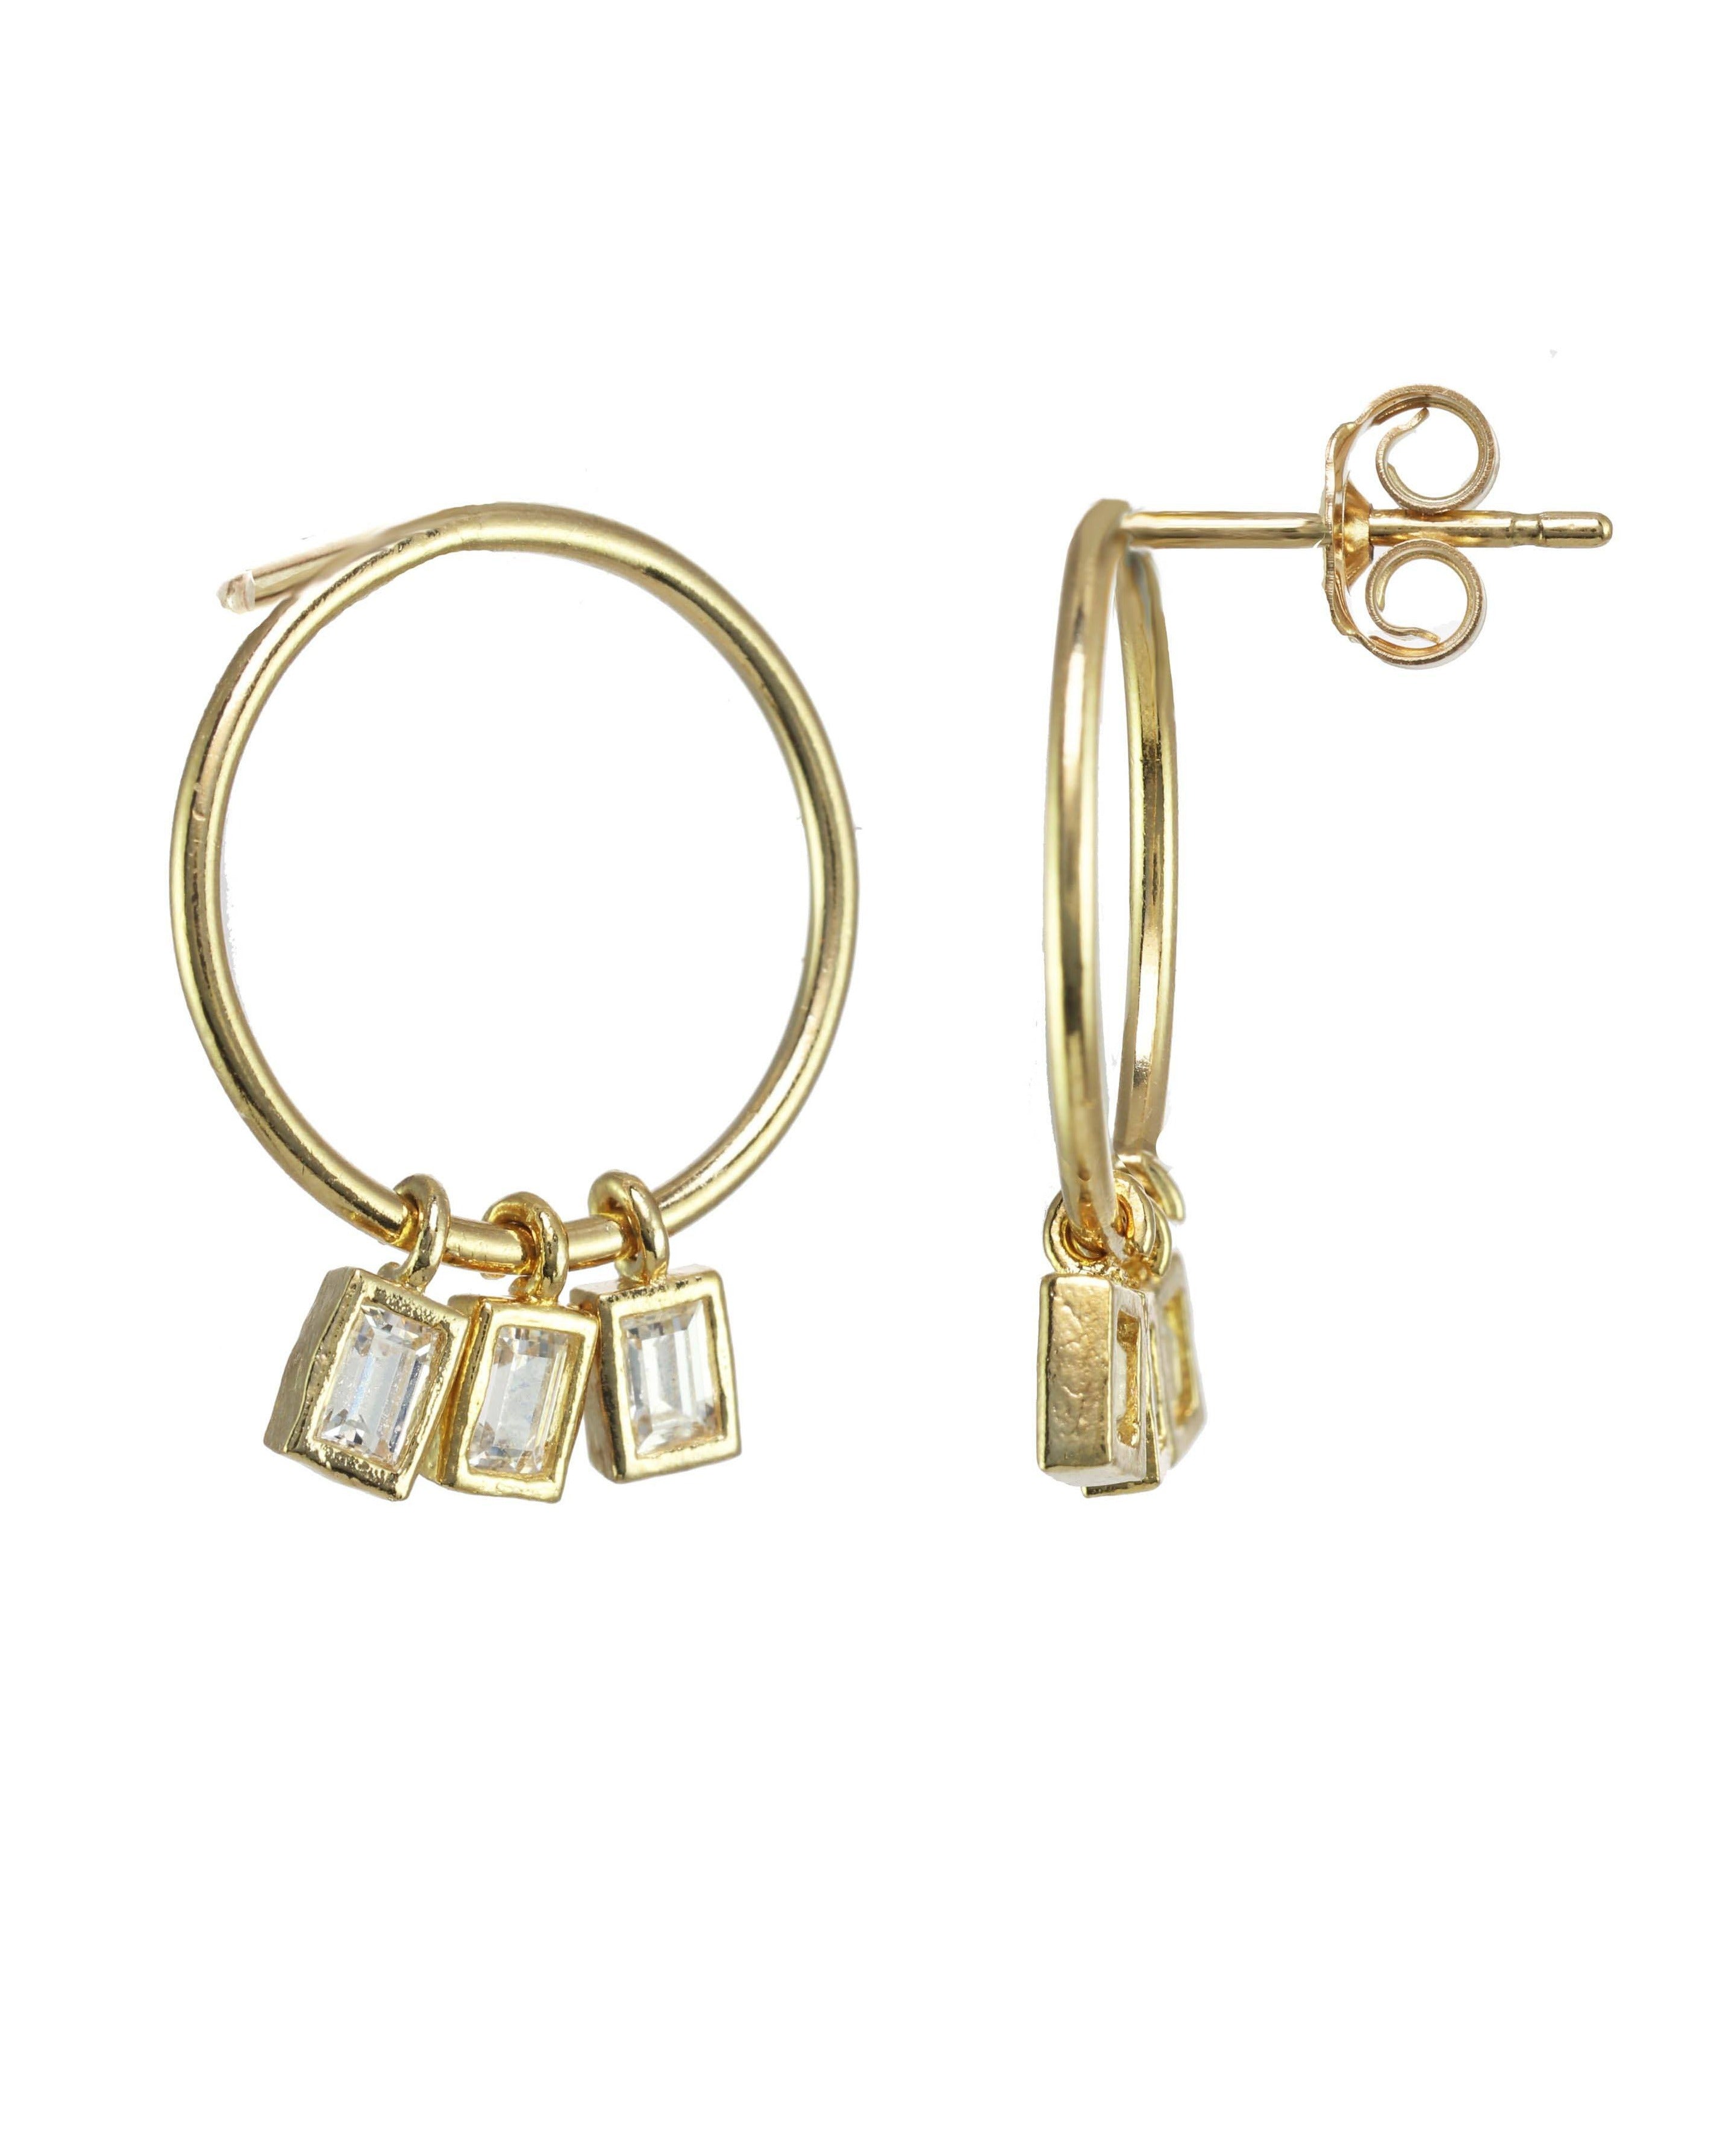 Madison Earrings by KOZAKH. Short dangling style stud earrings crafted in 14K Gold Filled, featuring a hoop and square cut Cubic Zirconia gems.